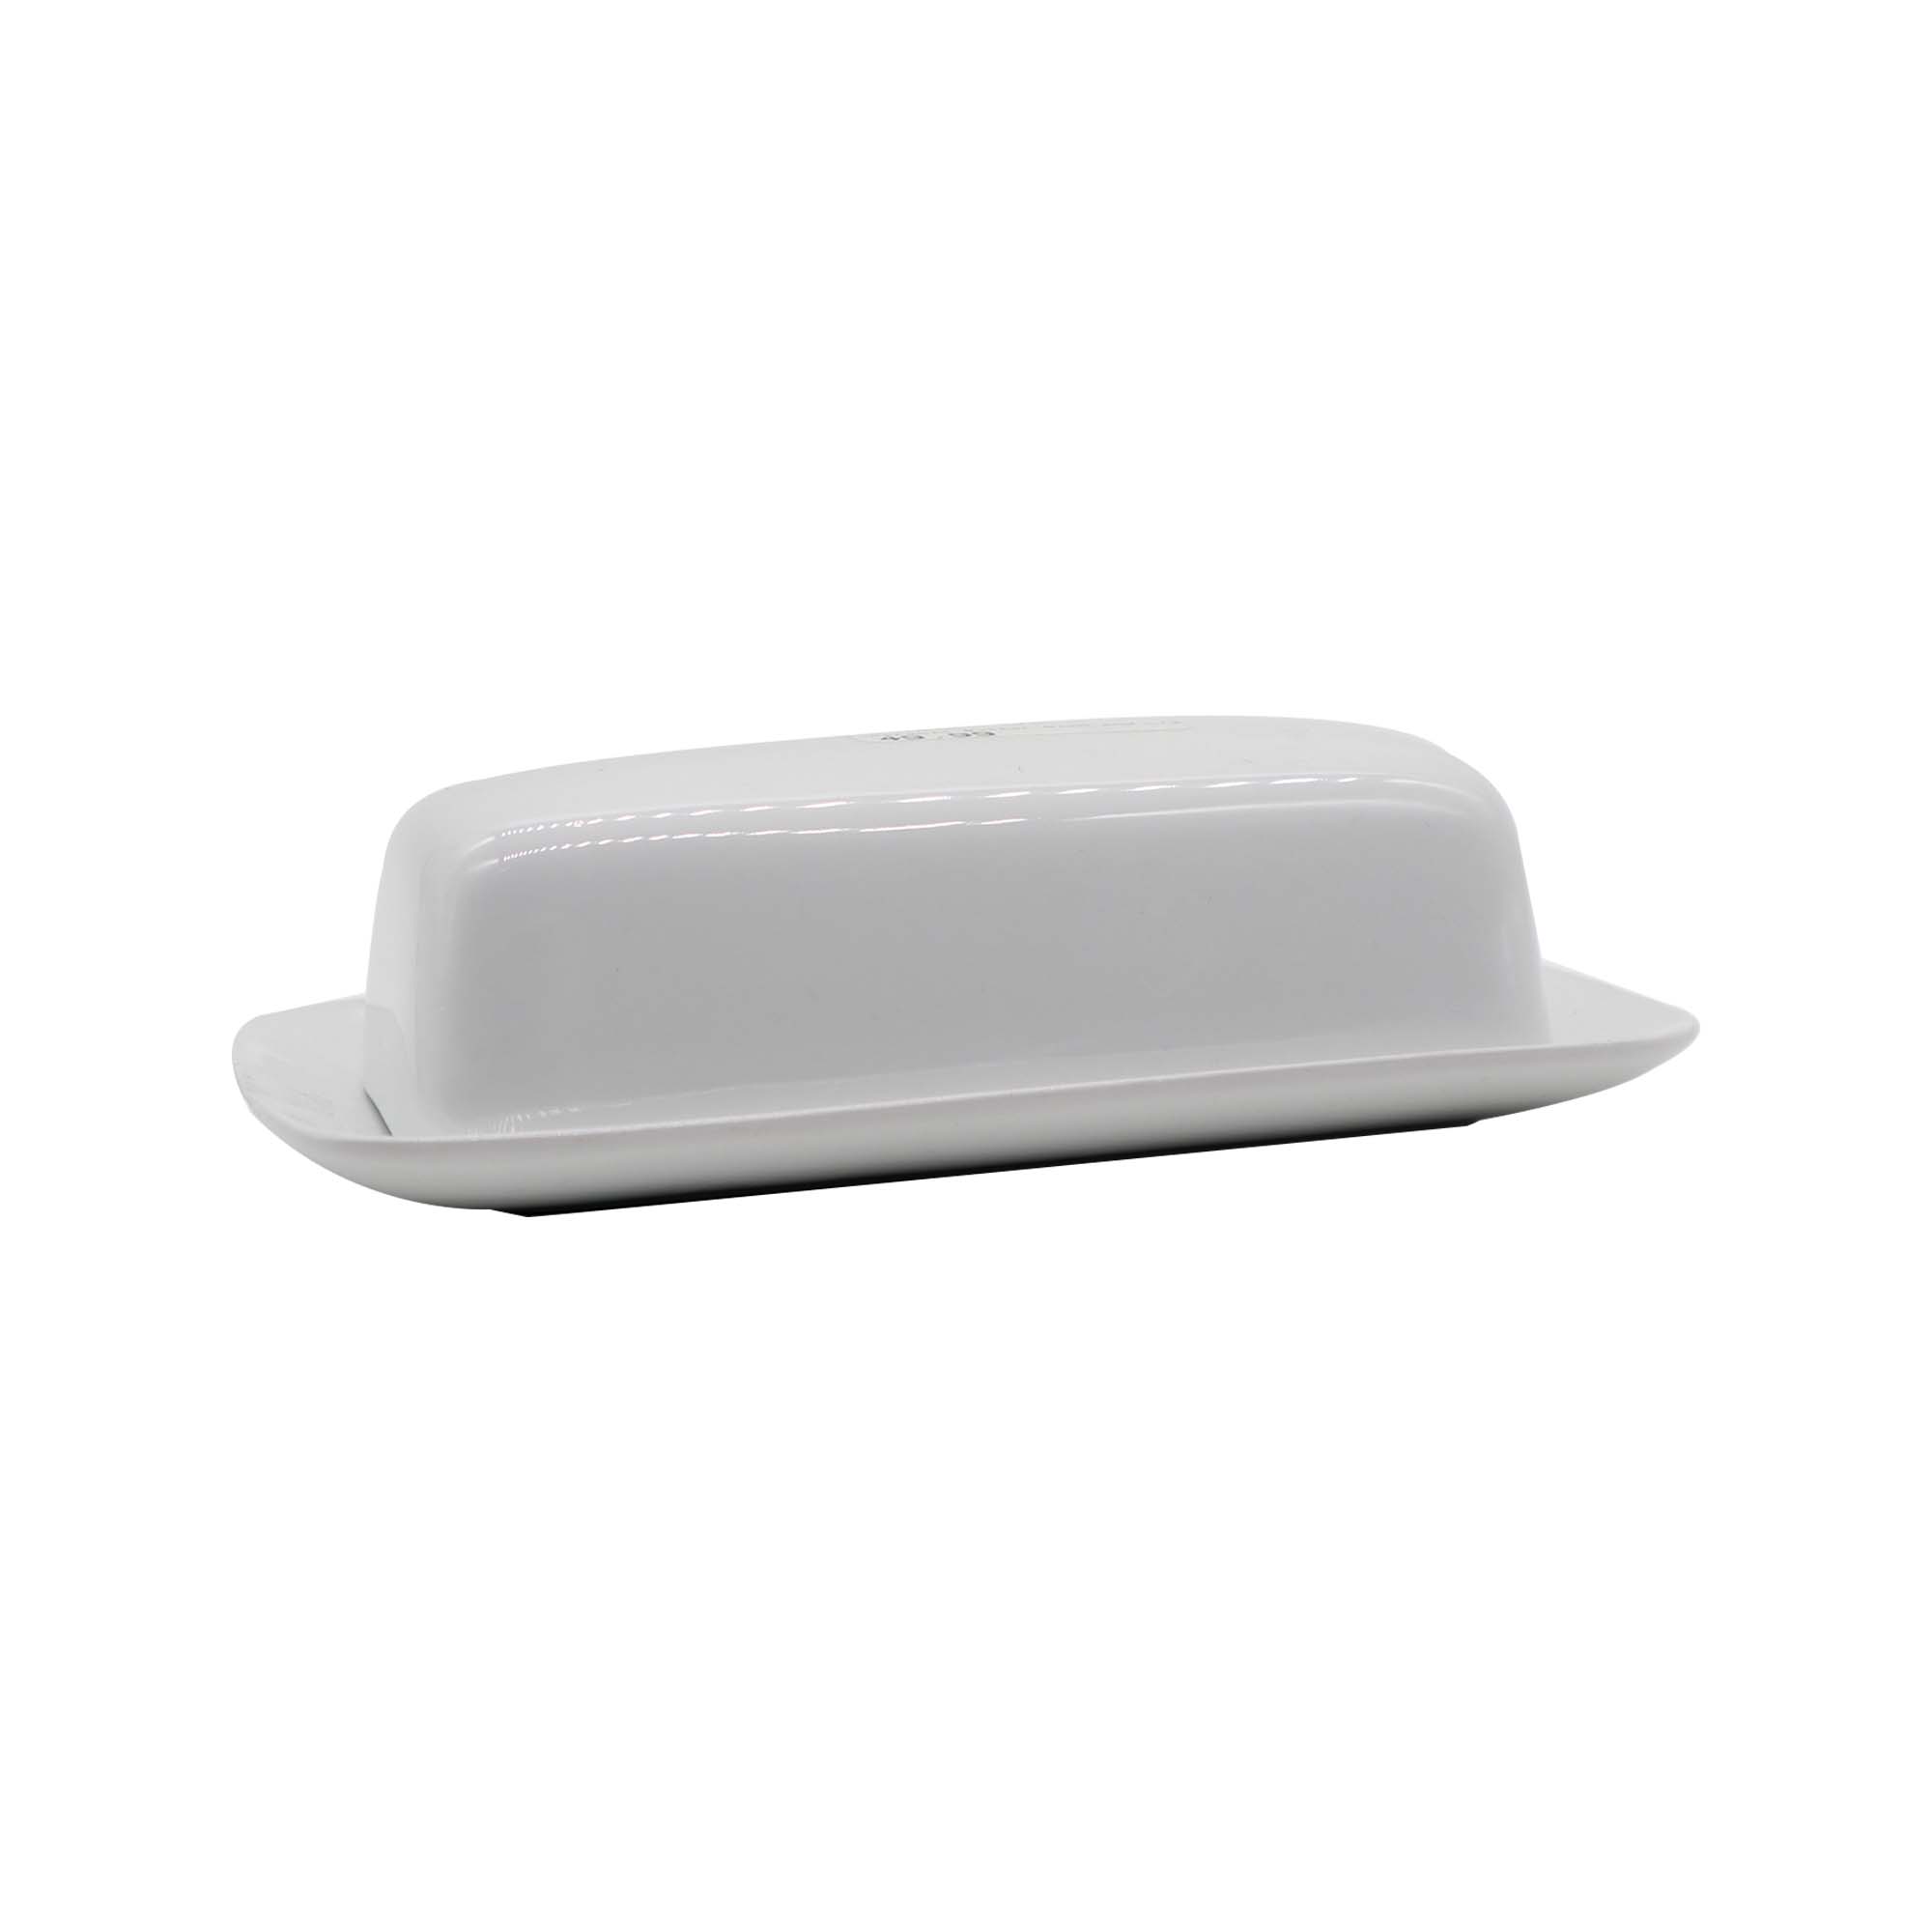 Ceramic Butter Dish and Lid 21 x 11 x 6